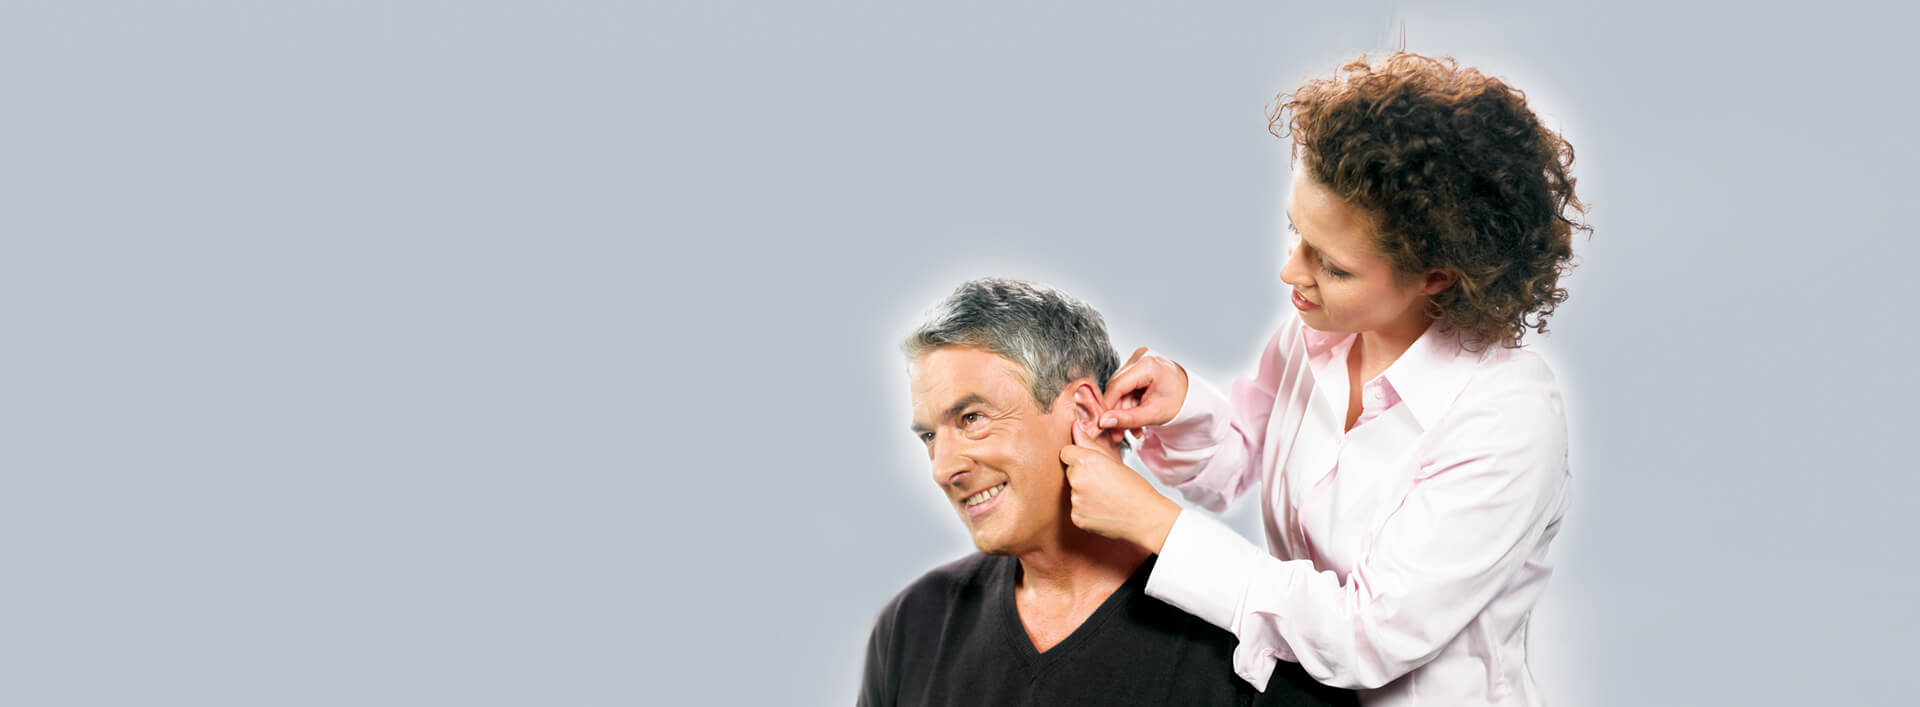 type-hearing-loss banner